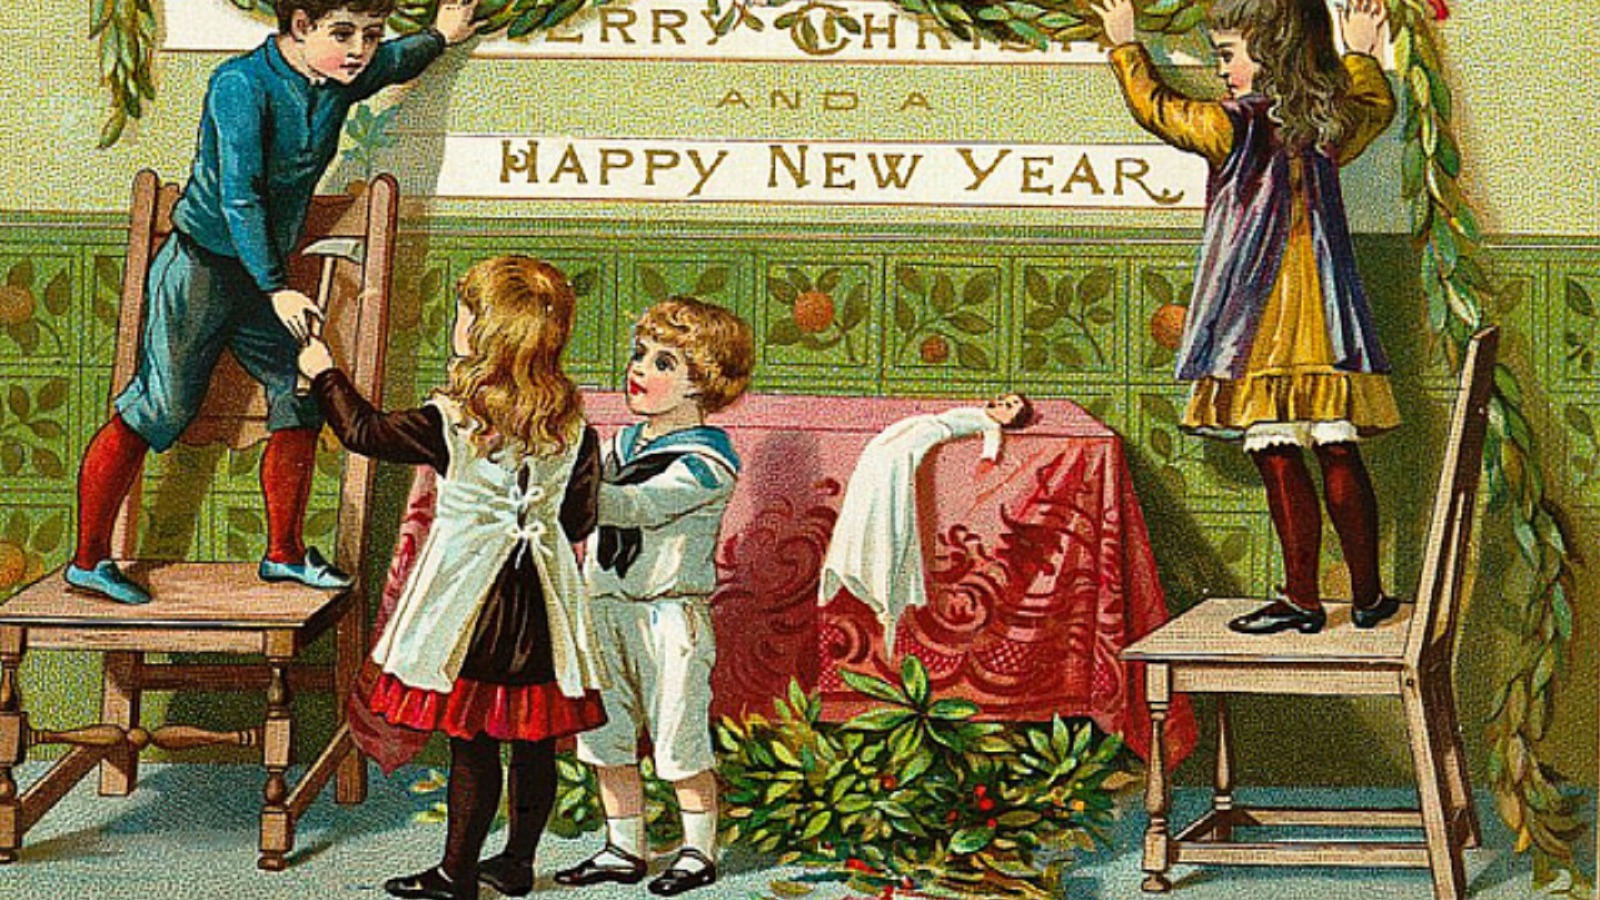 Vintage Merry Christmas & Happy New Year image